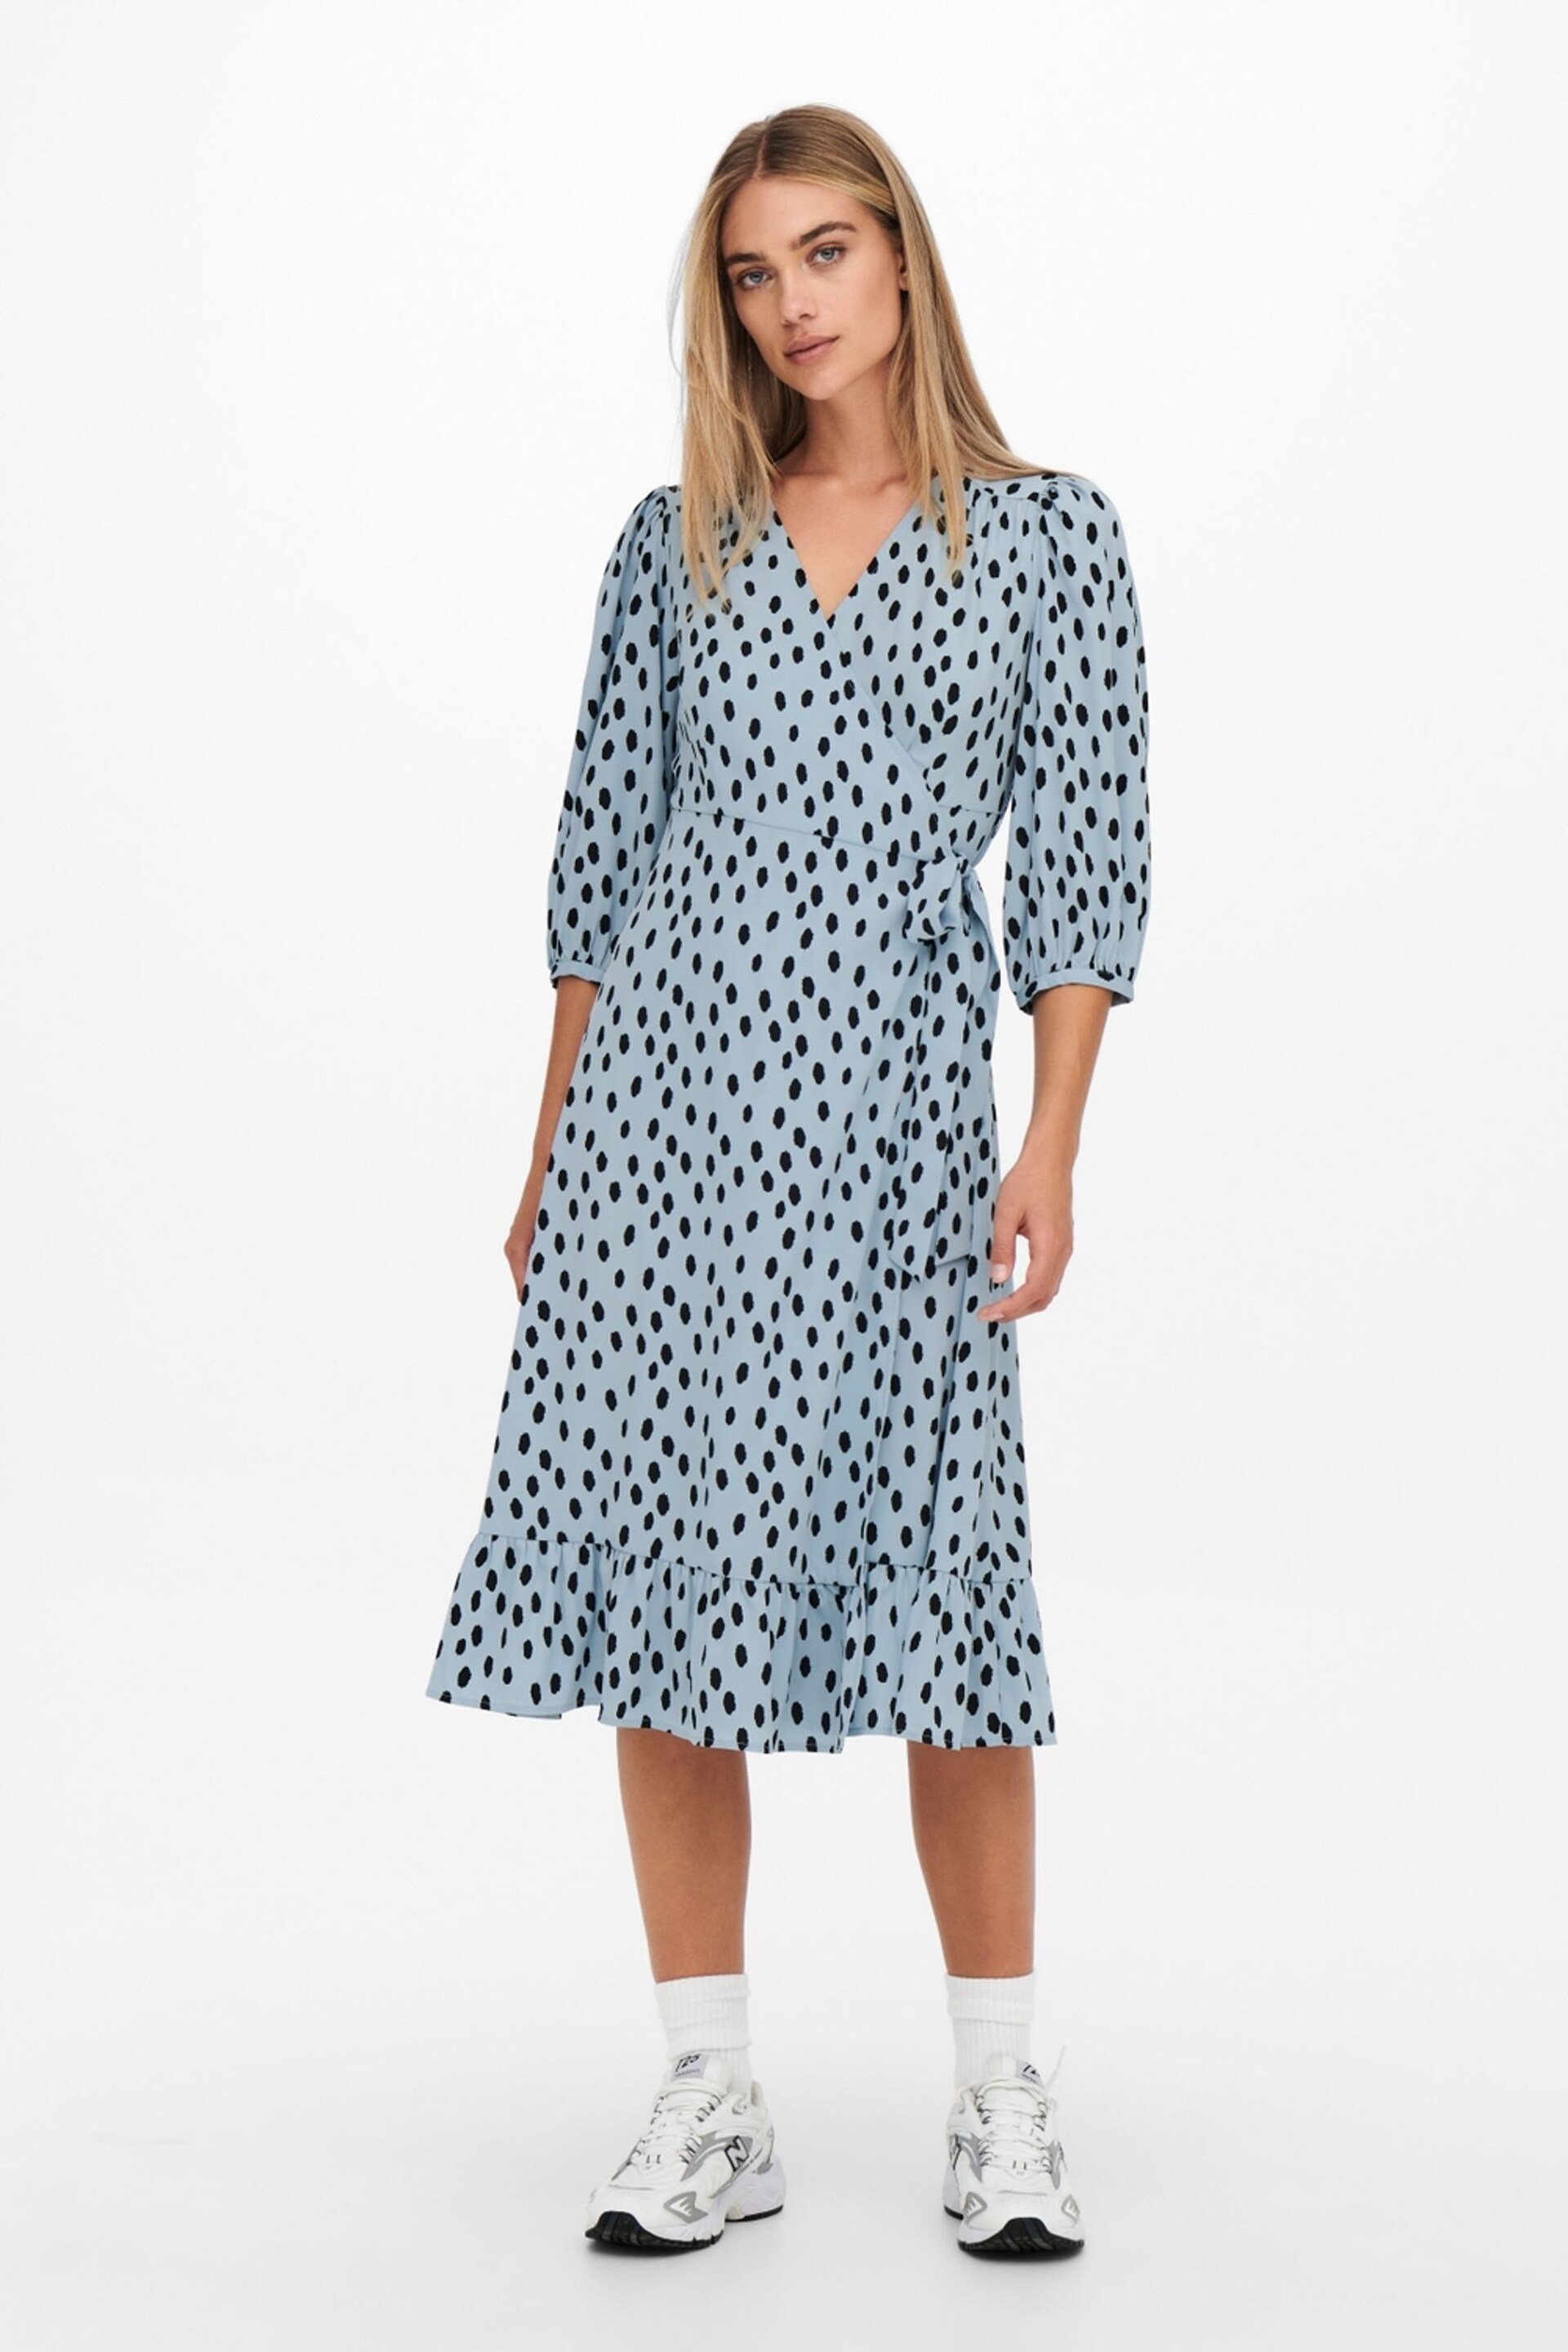 ONLY Blue Long Sleeve Wrap Midi Dress - Image 1 of 7